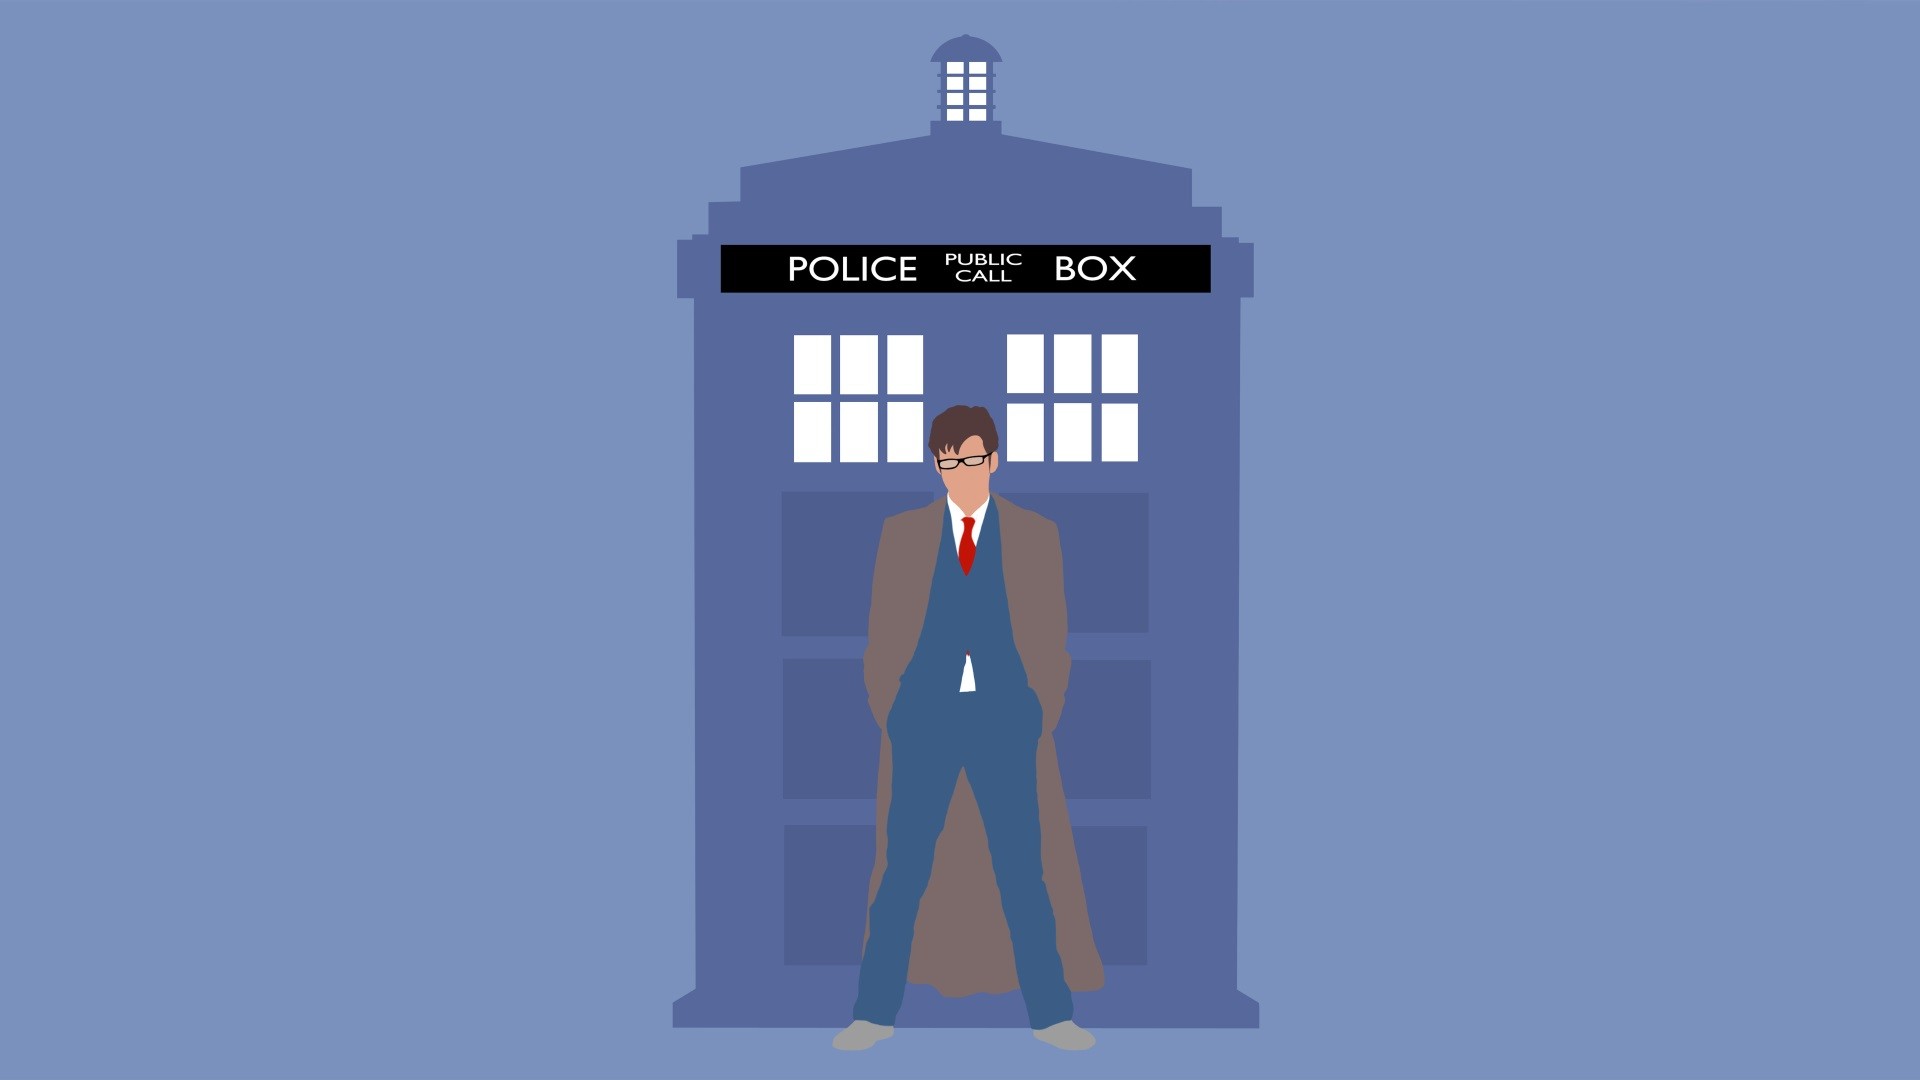 Doctor Who, The Doctor, TARDIS, Tenth Doctor Wallpaper